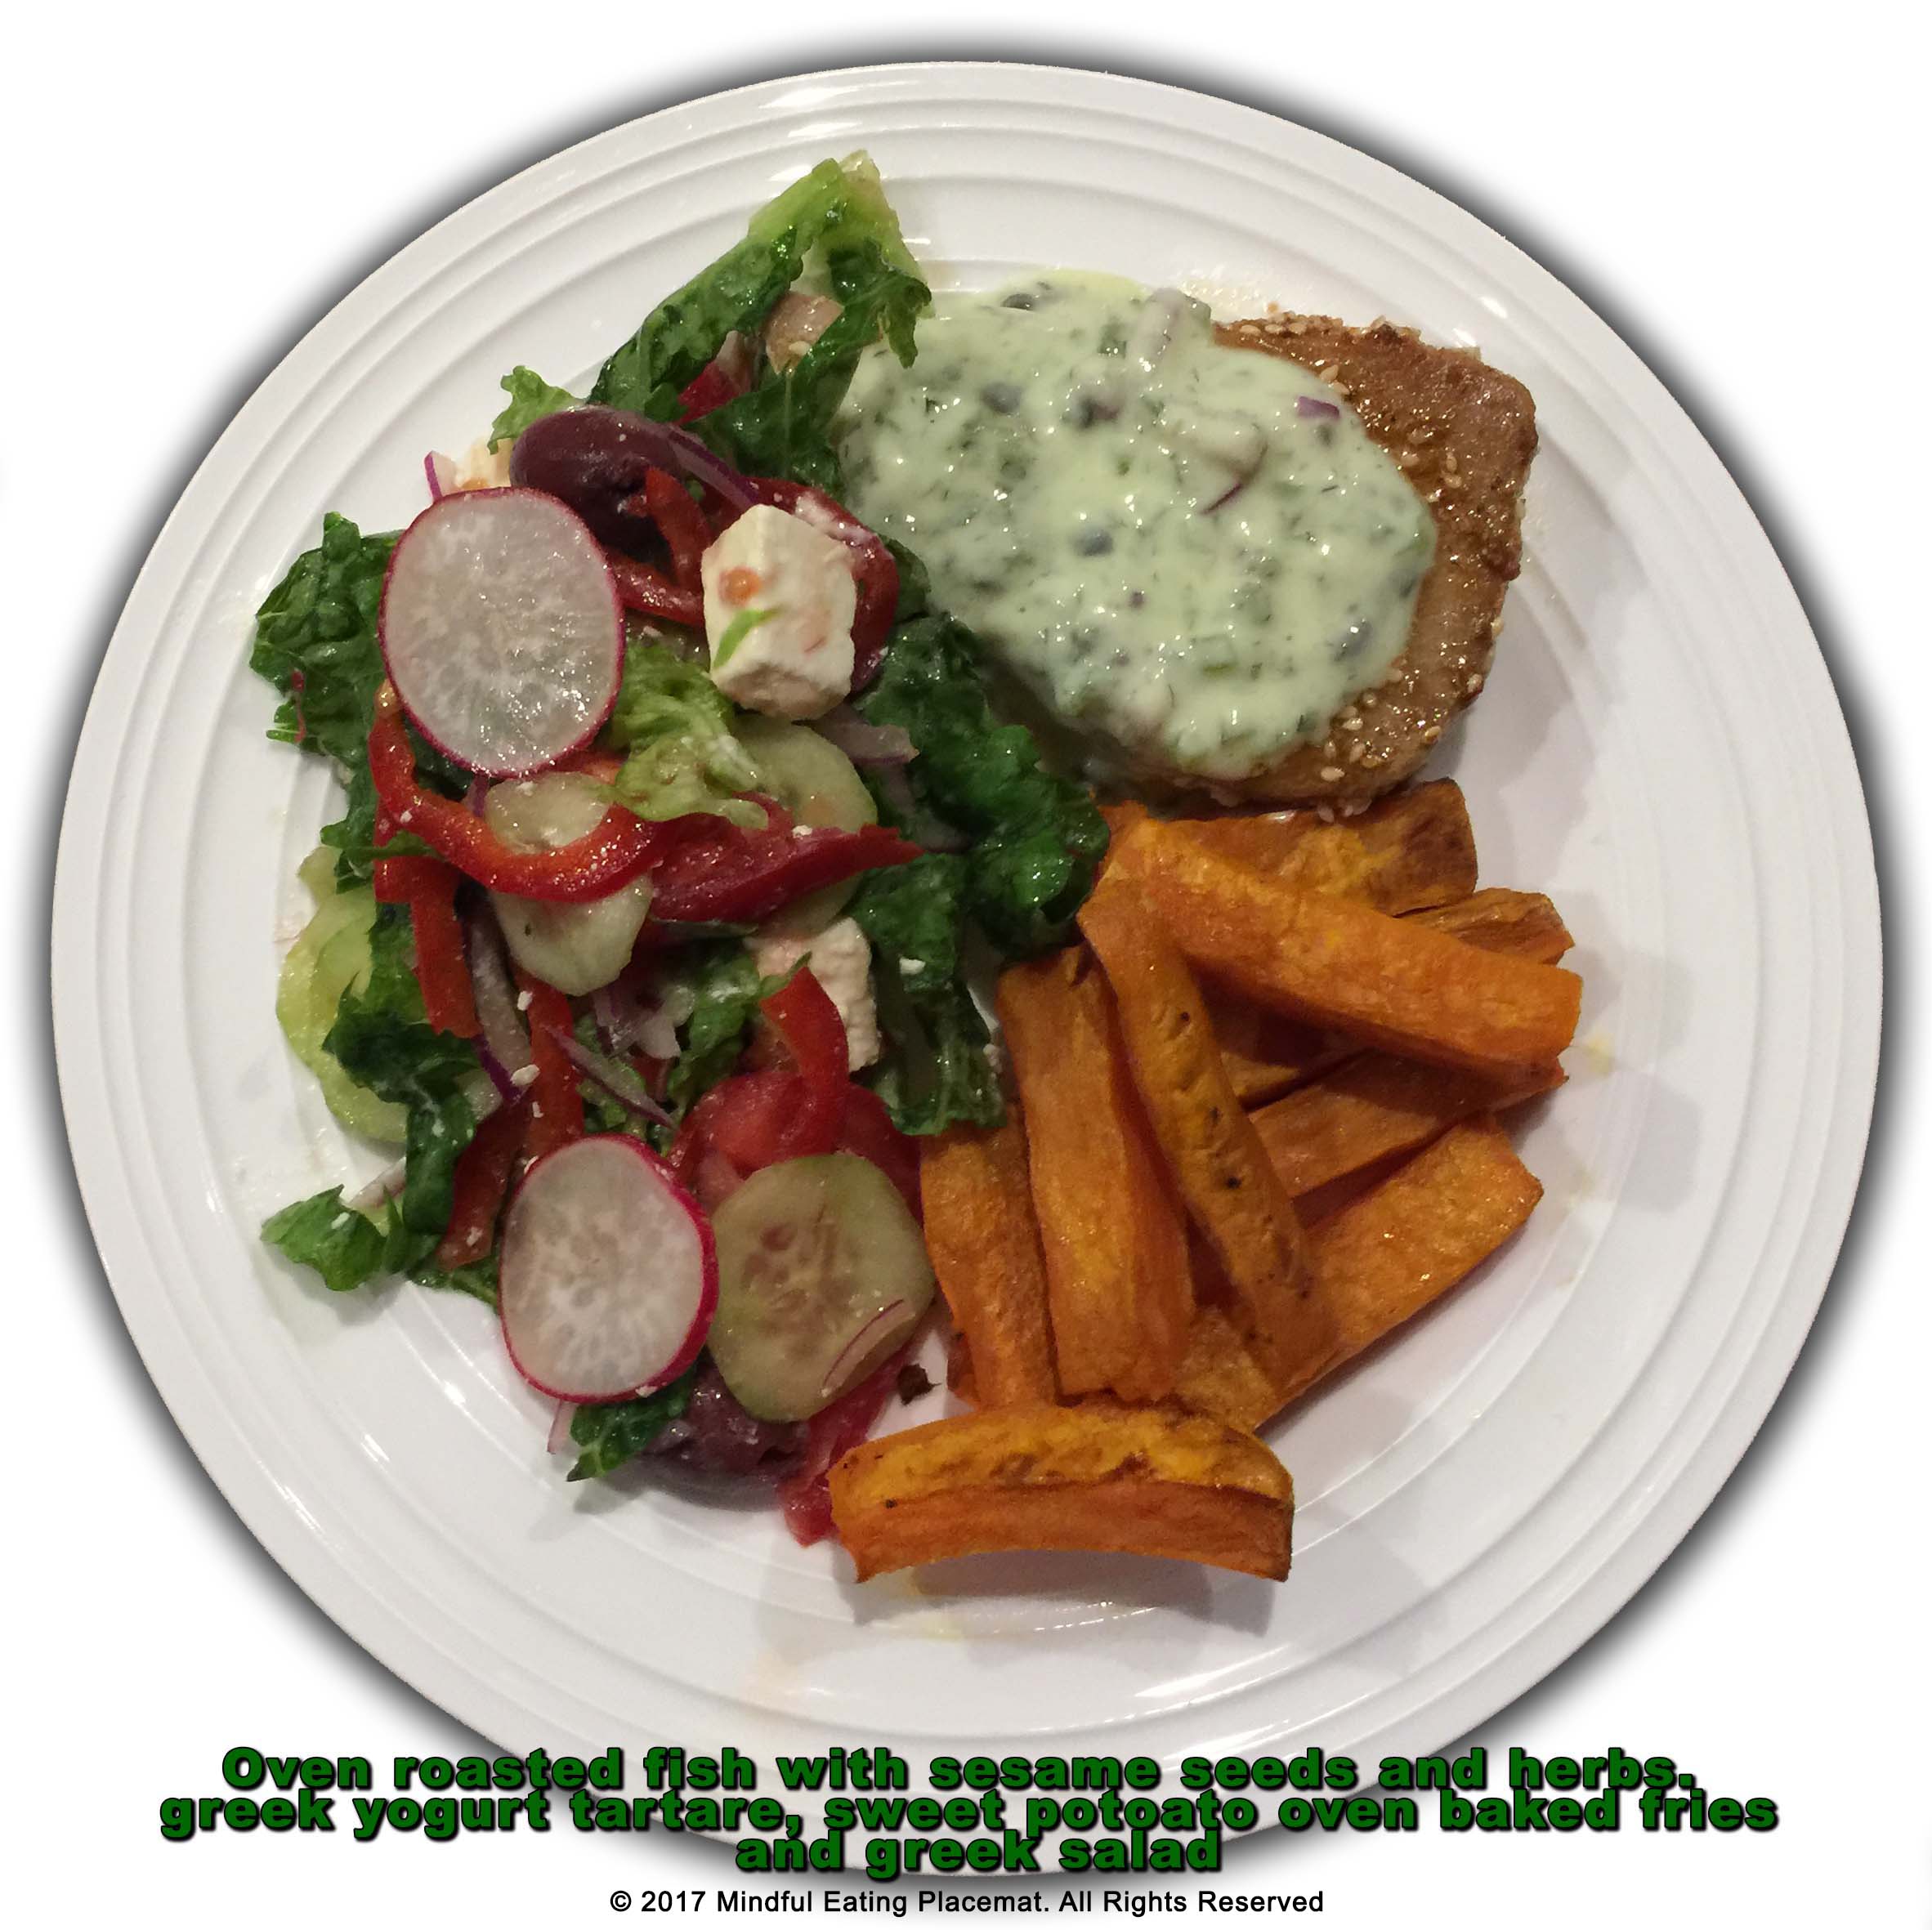 Baked sesame seed fish with sweet potato fries and greek salad